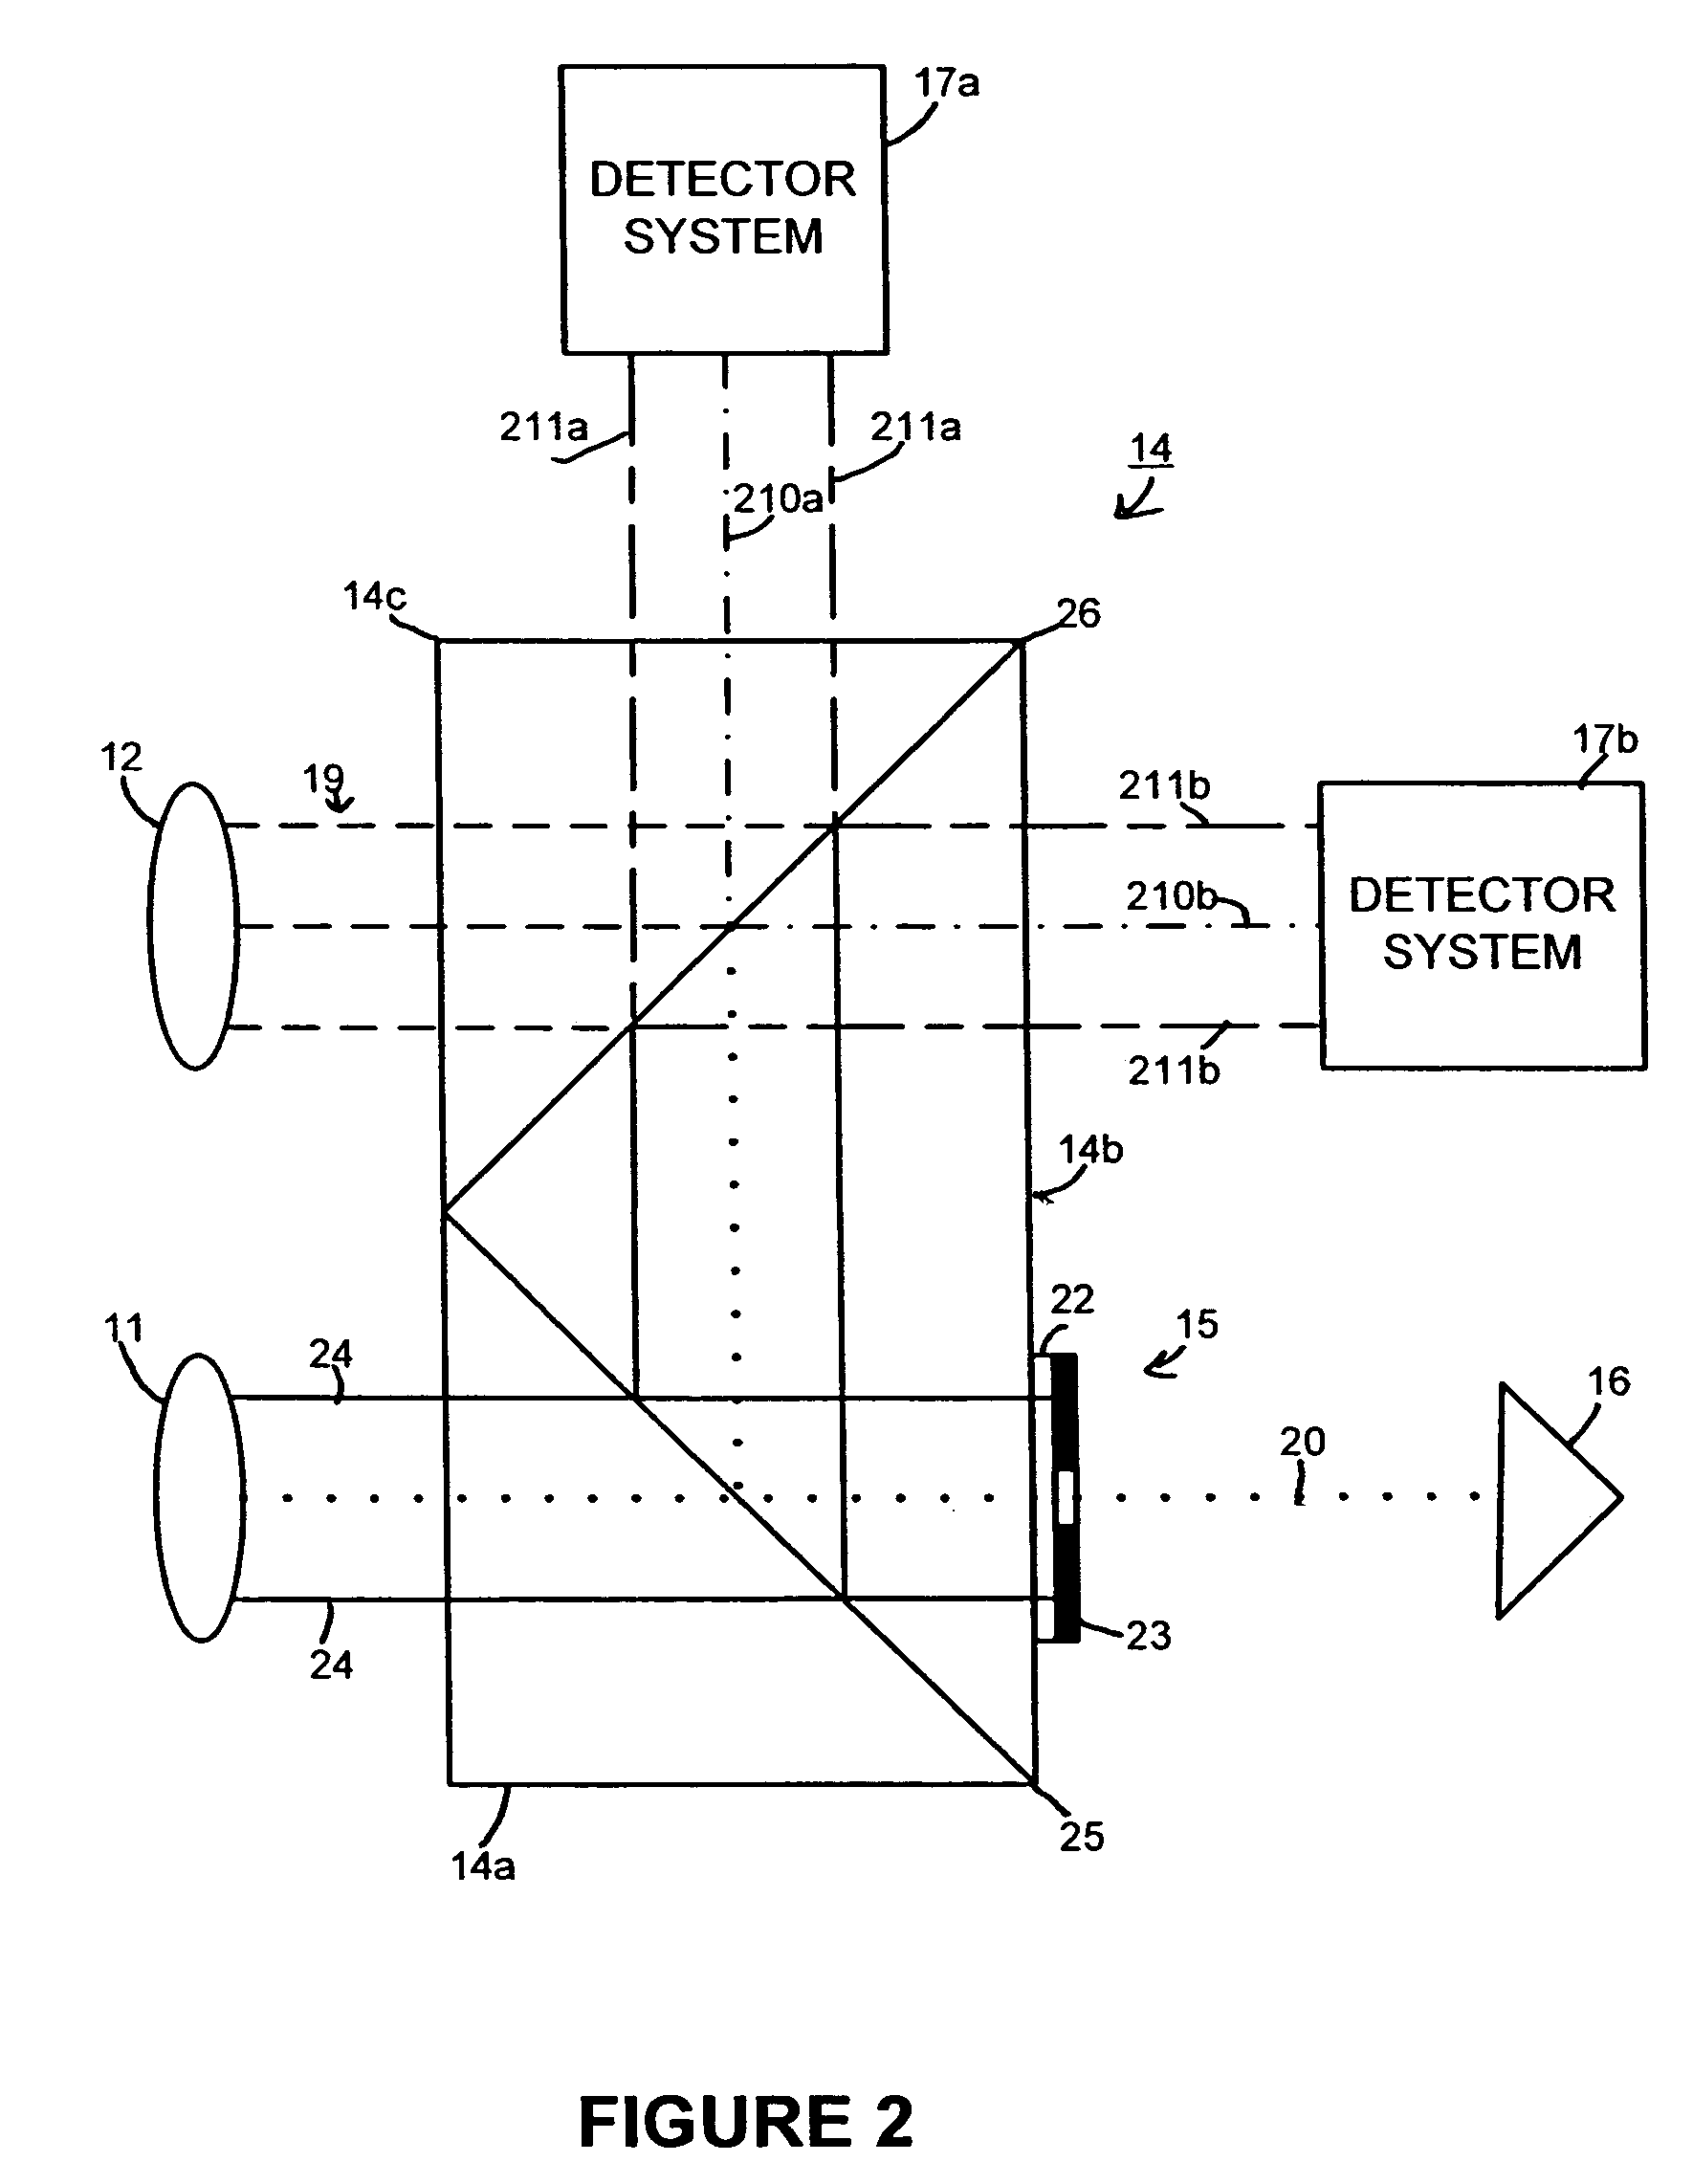 Monolithic, spatially-separated, common path interferometer